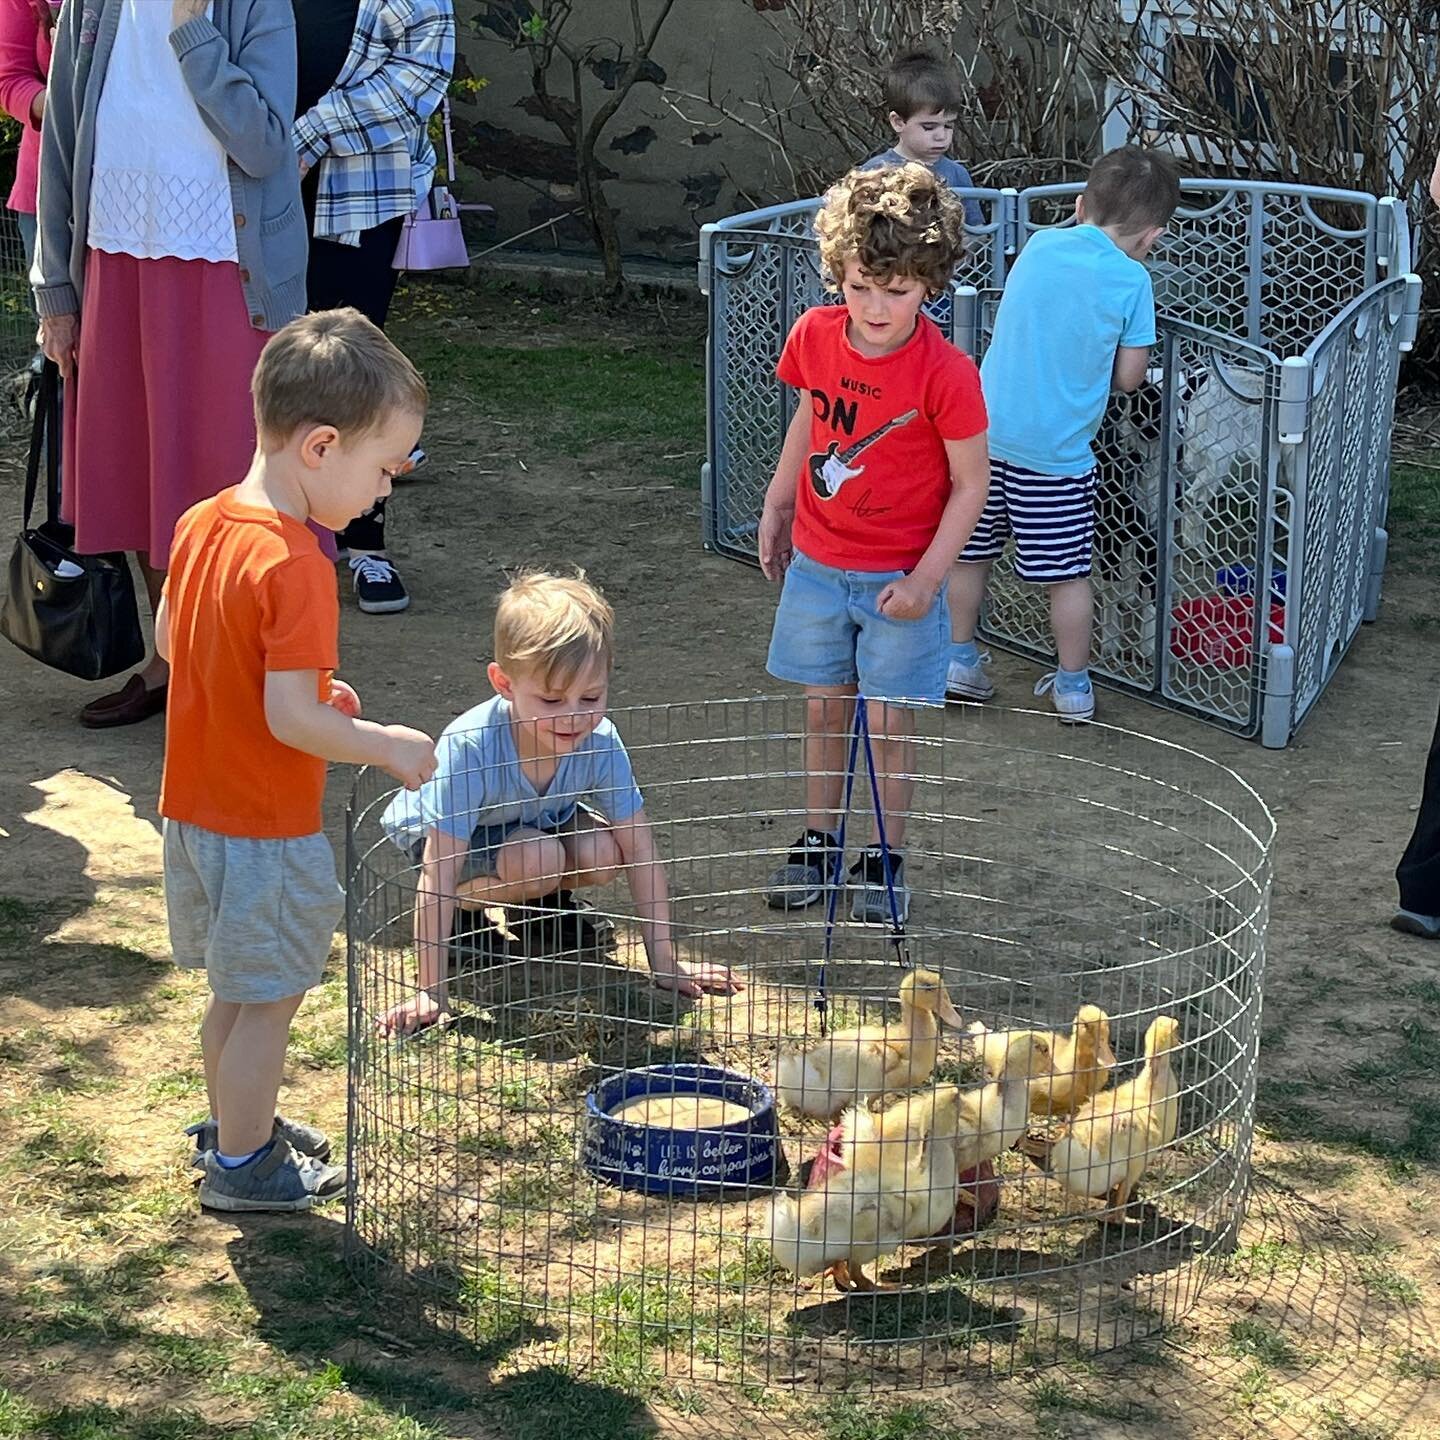 Beautiful weather for &ldquo;Animal Day&rdquo;! We got a chance to see and touch mammals, reptiles and birds in our own yard! #peaceablekingdompettingzoo #montessori #bethlehem #bethlehempa #igbethlehem